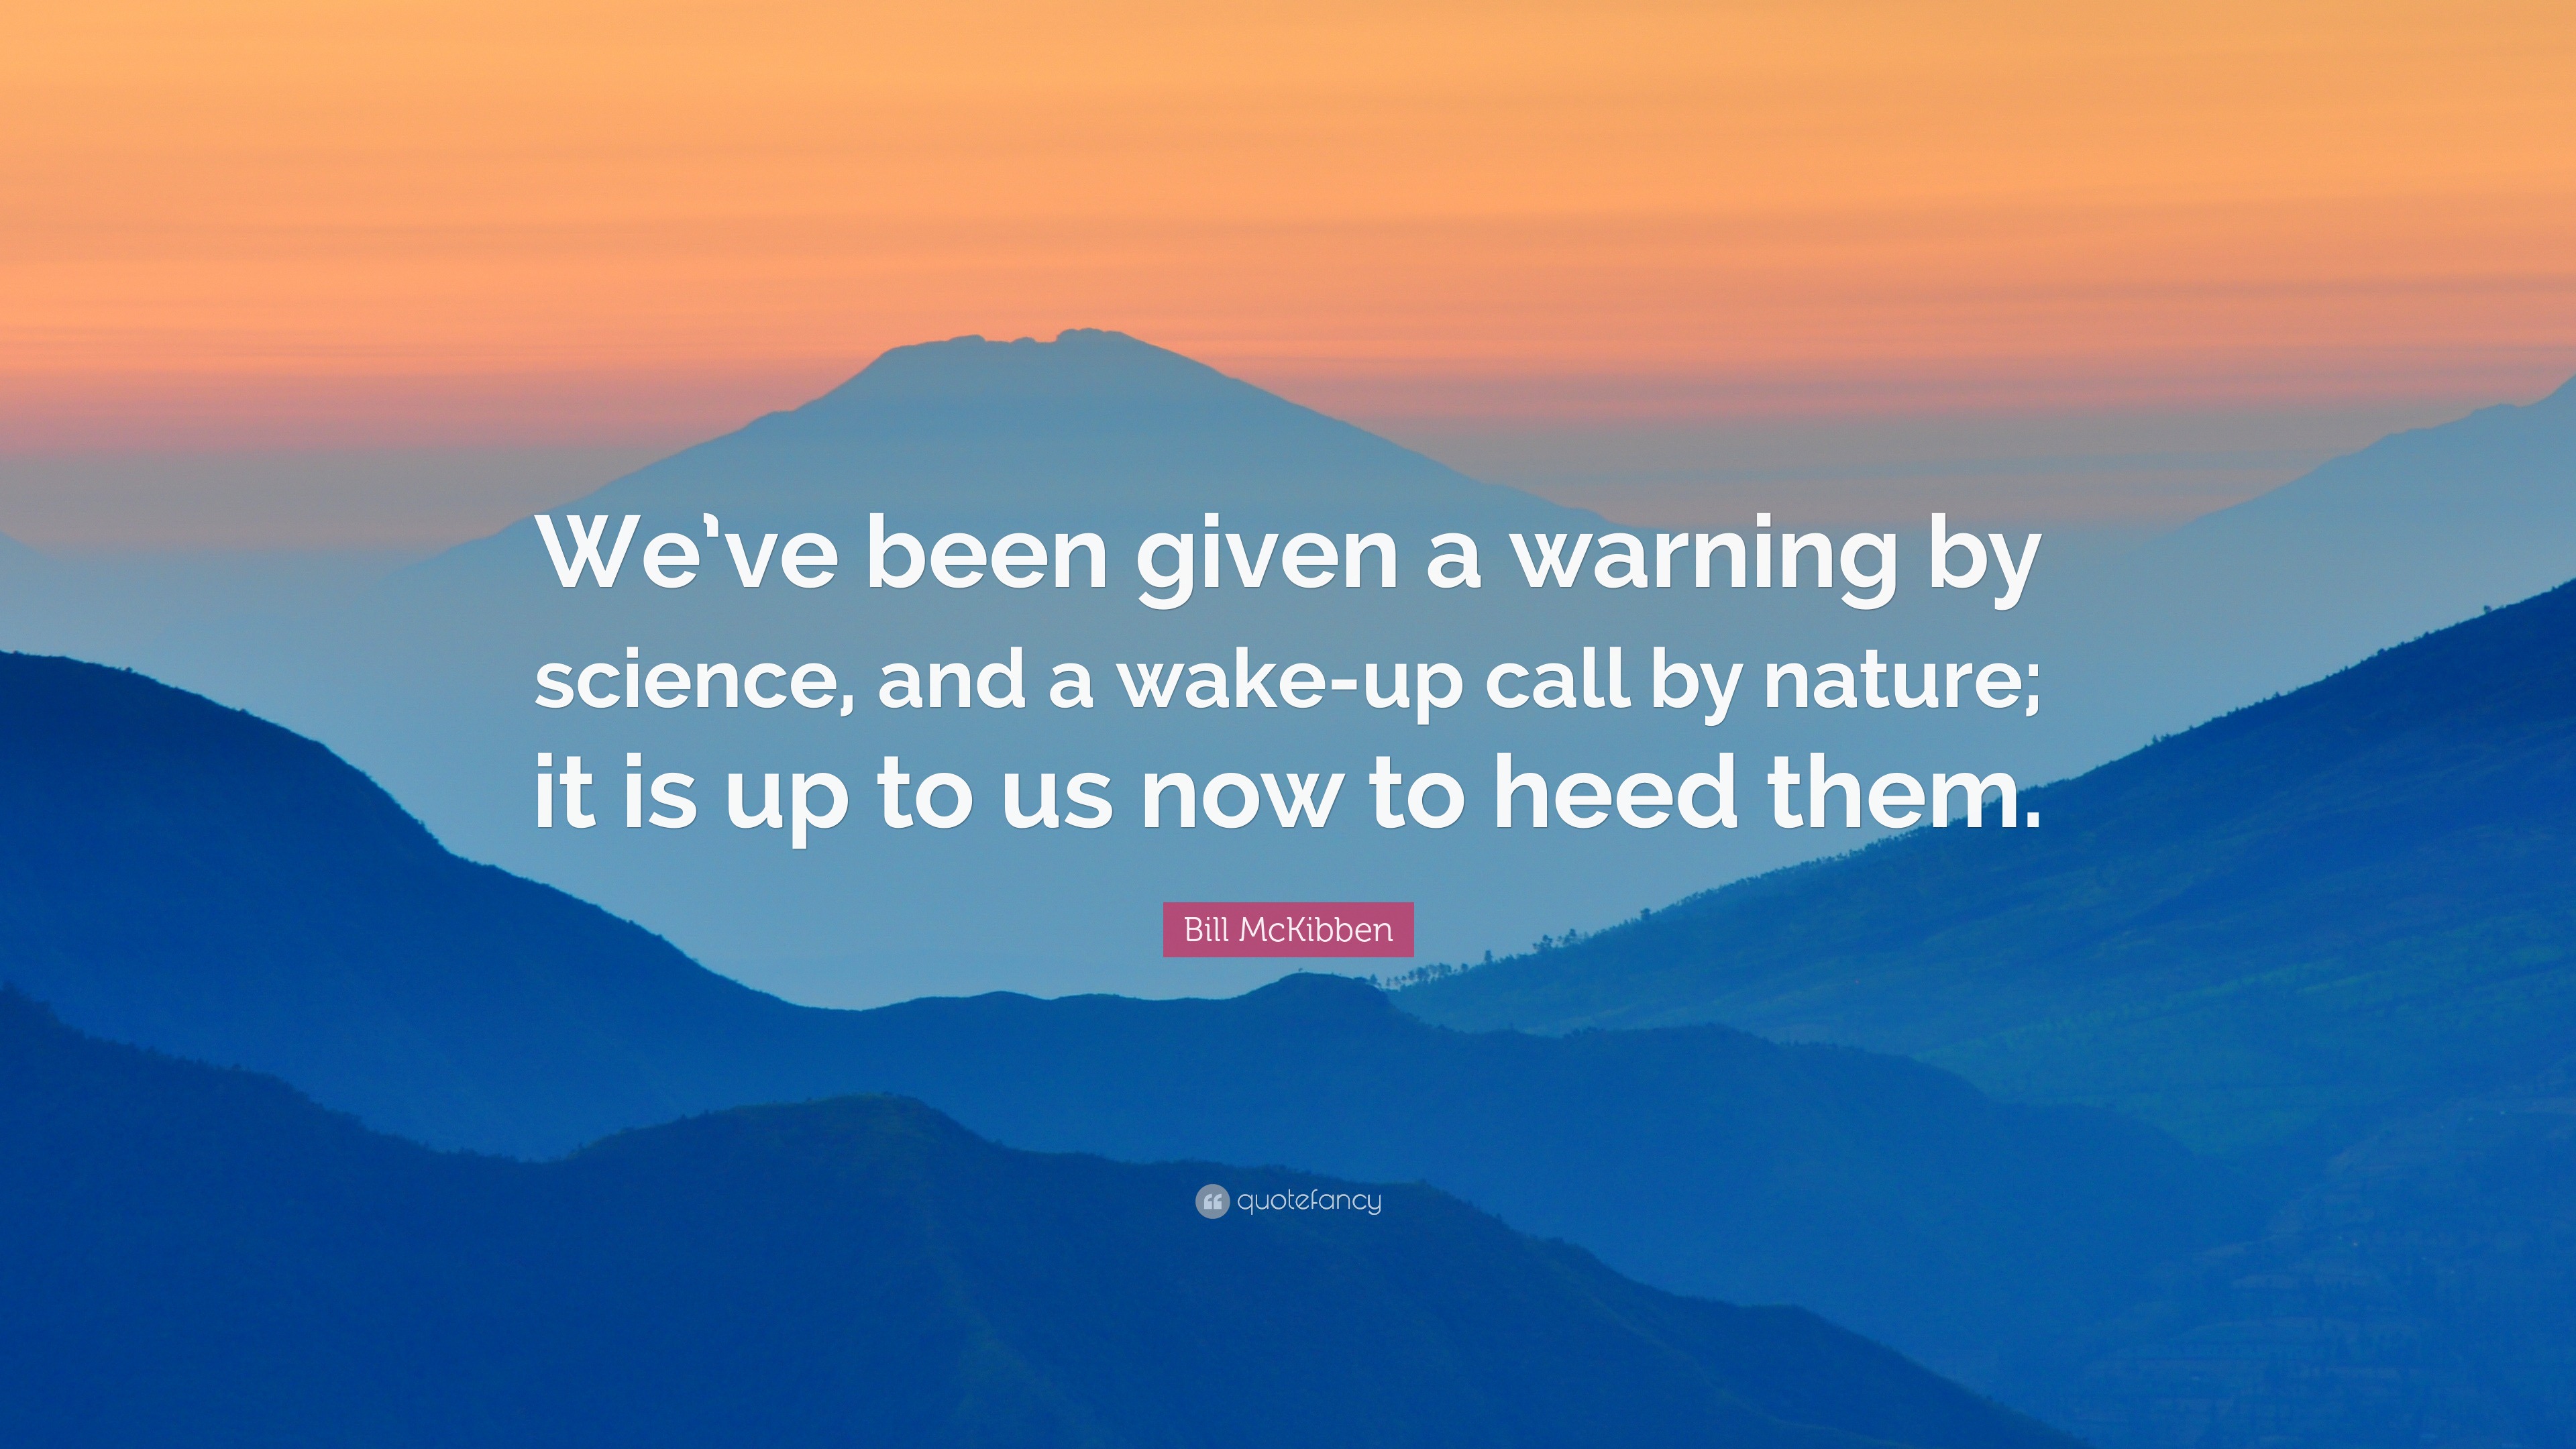 Bill McKibben Quote: “We’ve been given a warning by science, and a wake